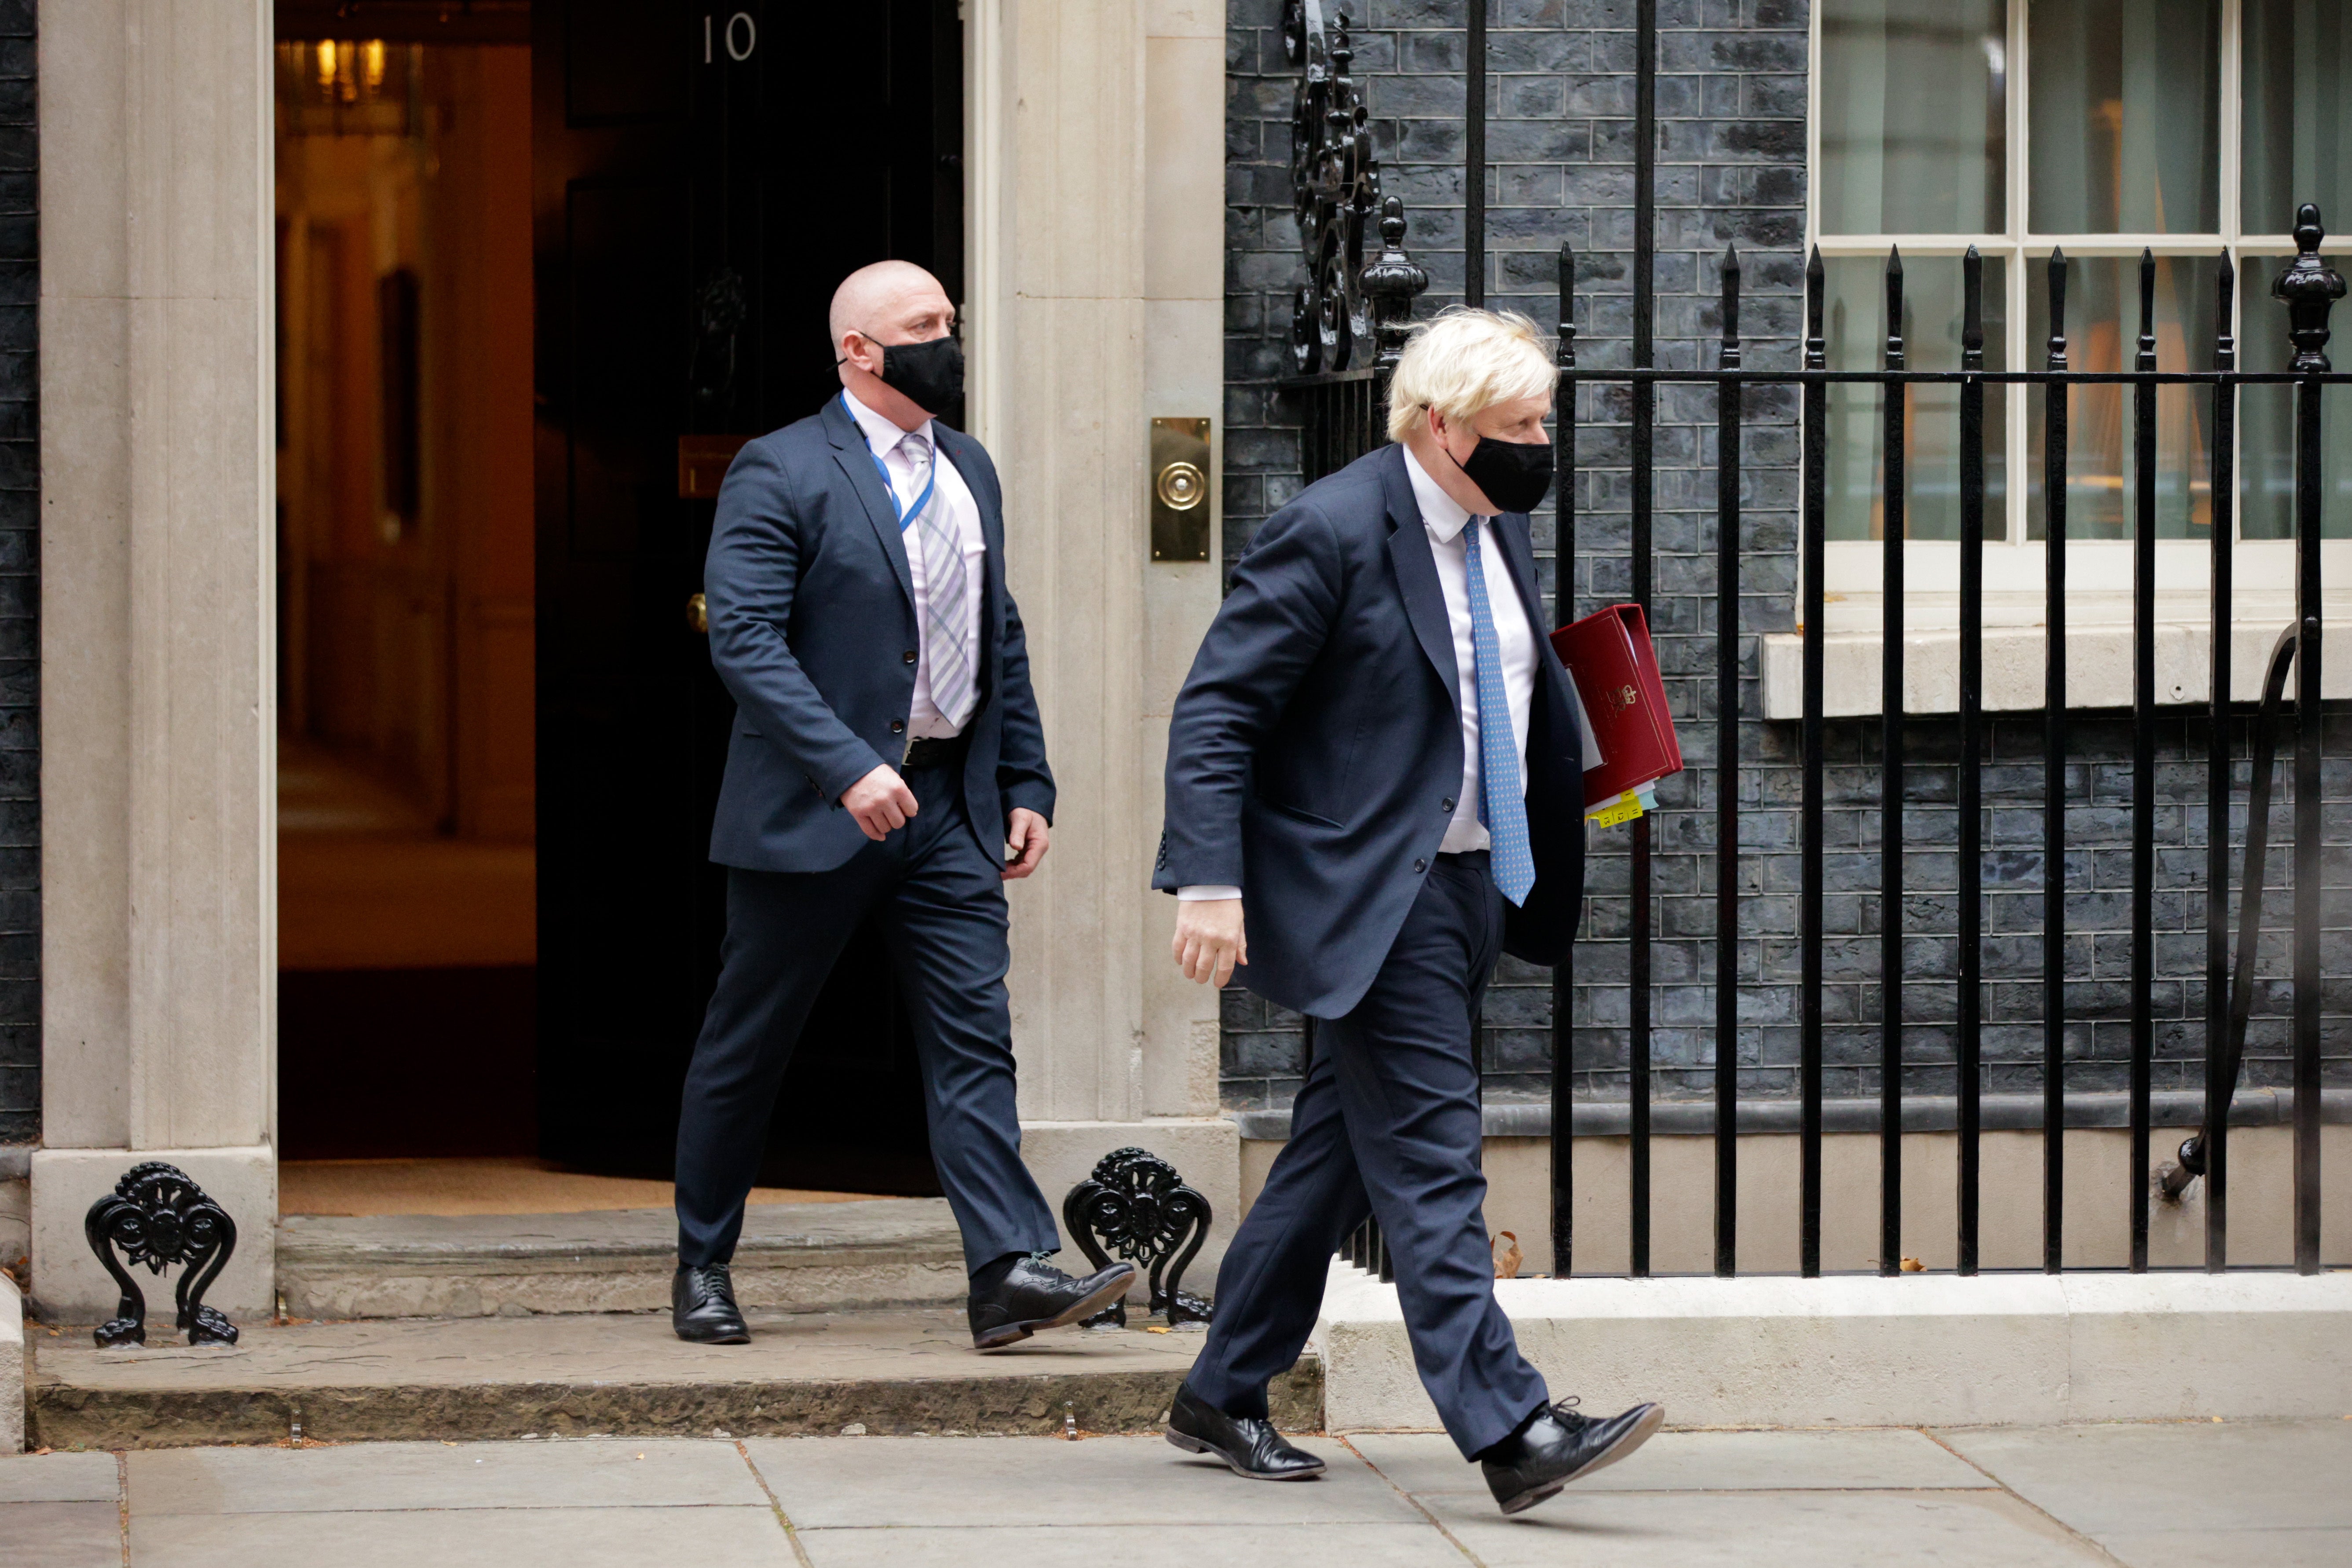 Boris Johnson leaves 10 Downing Street for his weekly PMQs